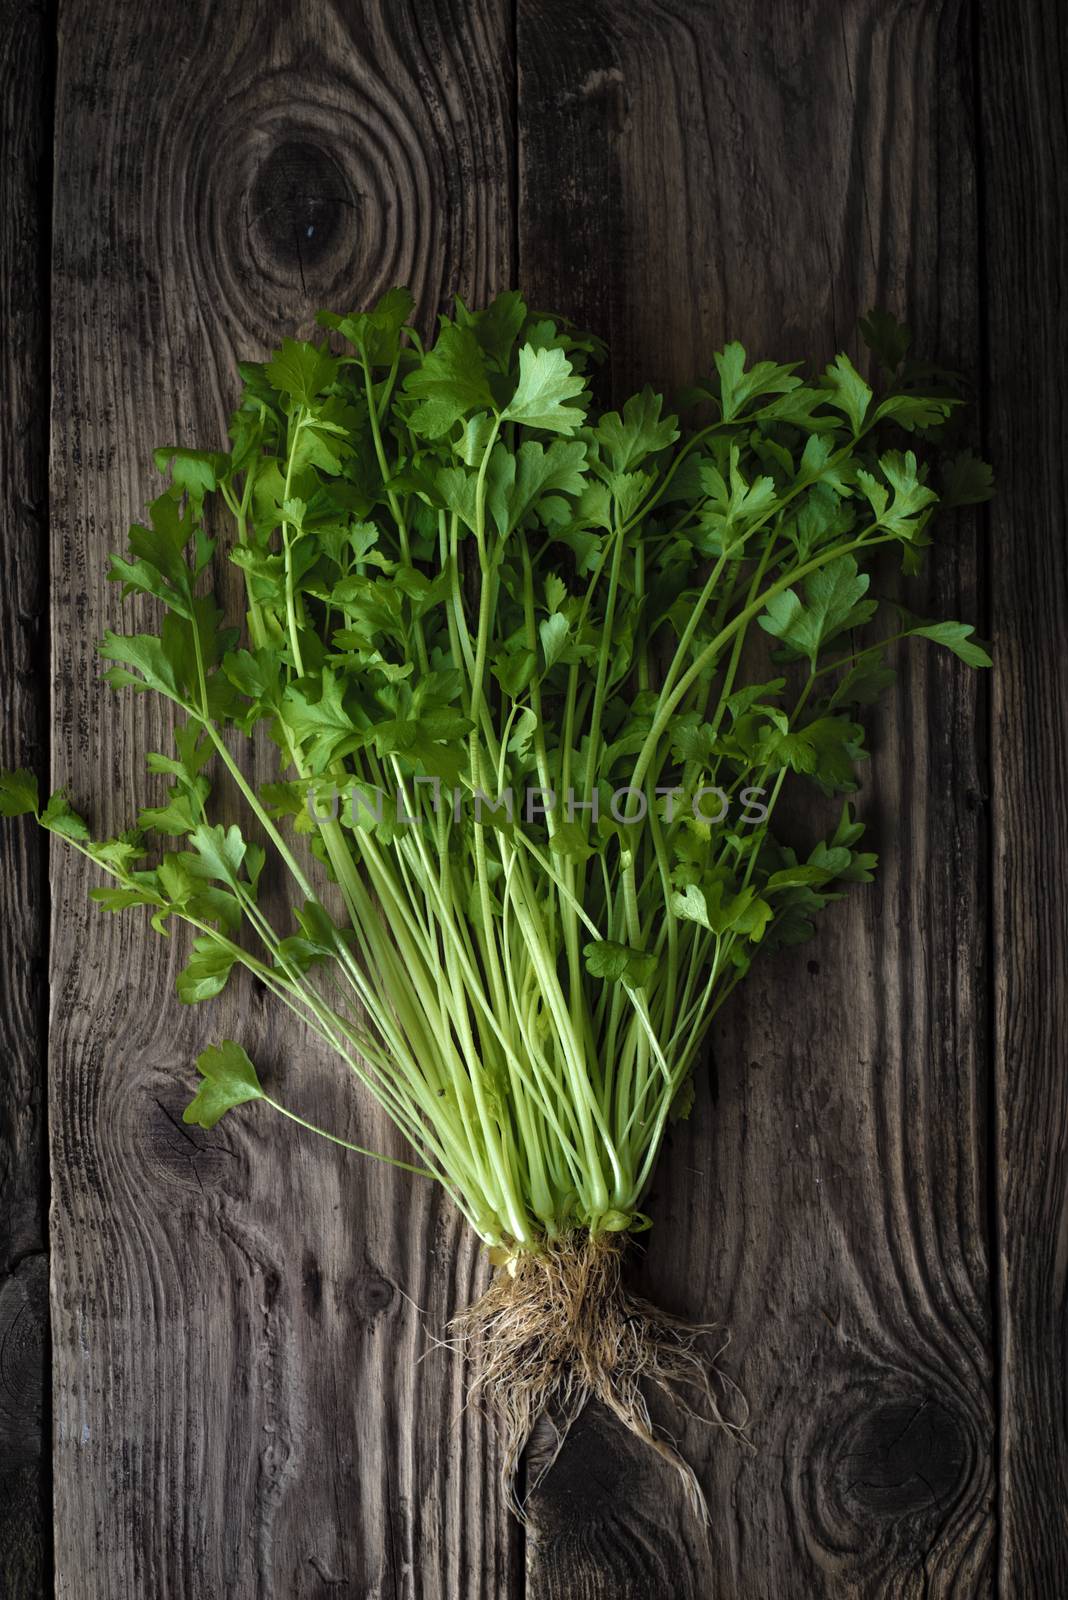 Green celery with roots on a wooden table vertical